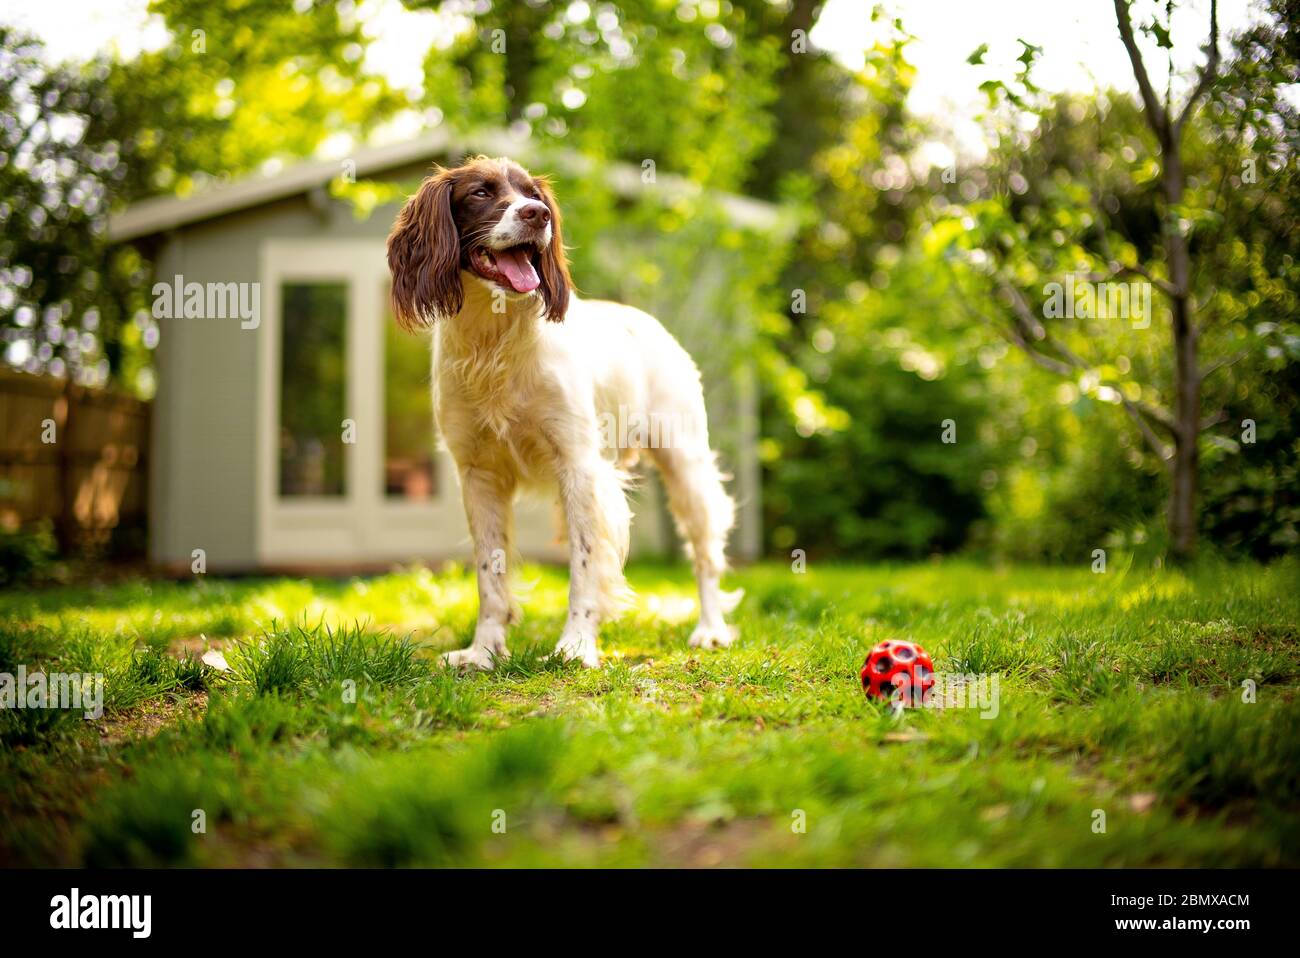 An English Springer Spaniel dog happy in a leafy garden on a summers day with a summer house in the background and a red ball in the foreground. Stock Photo